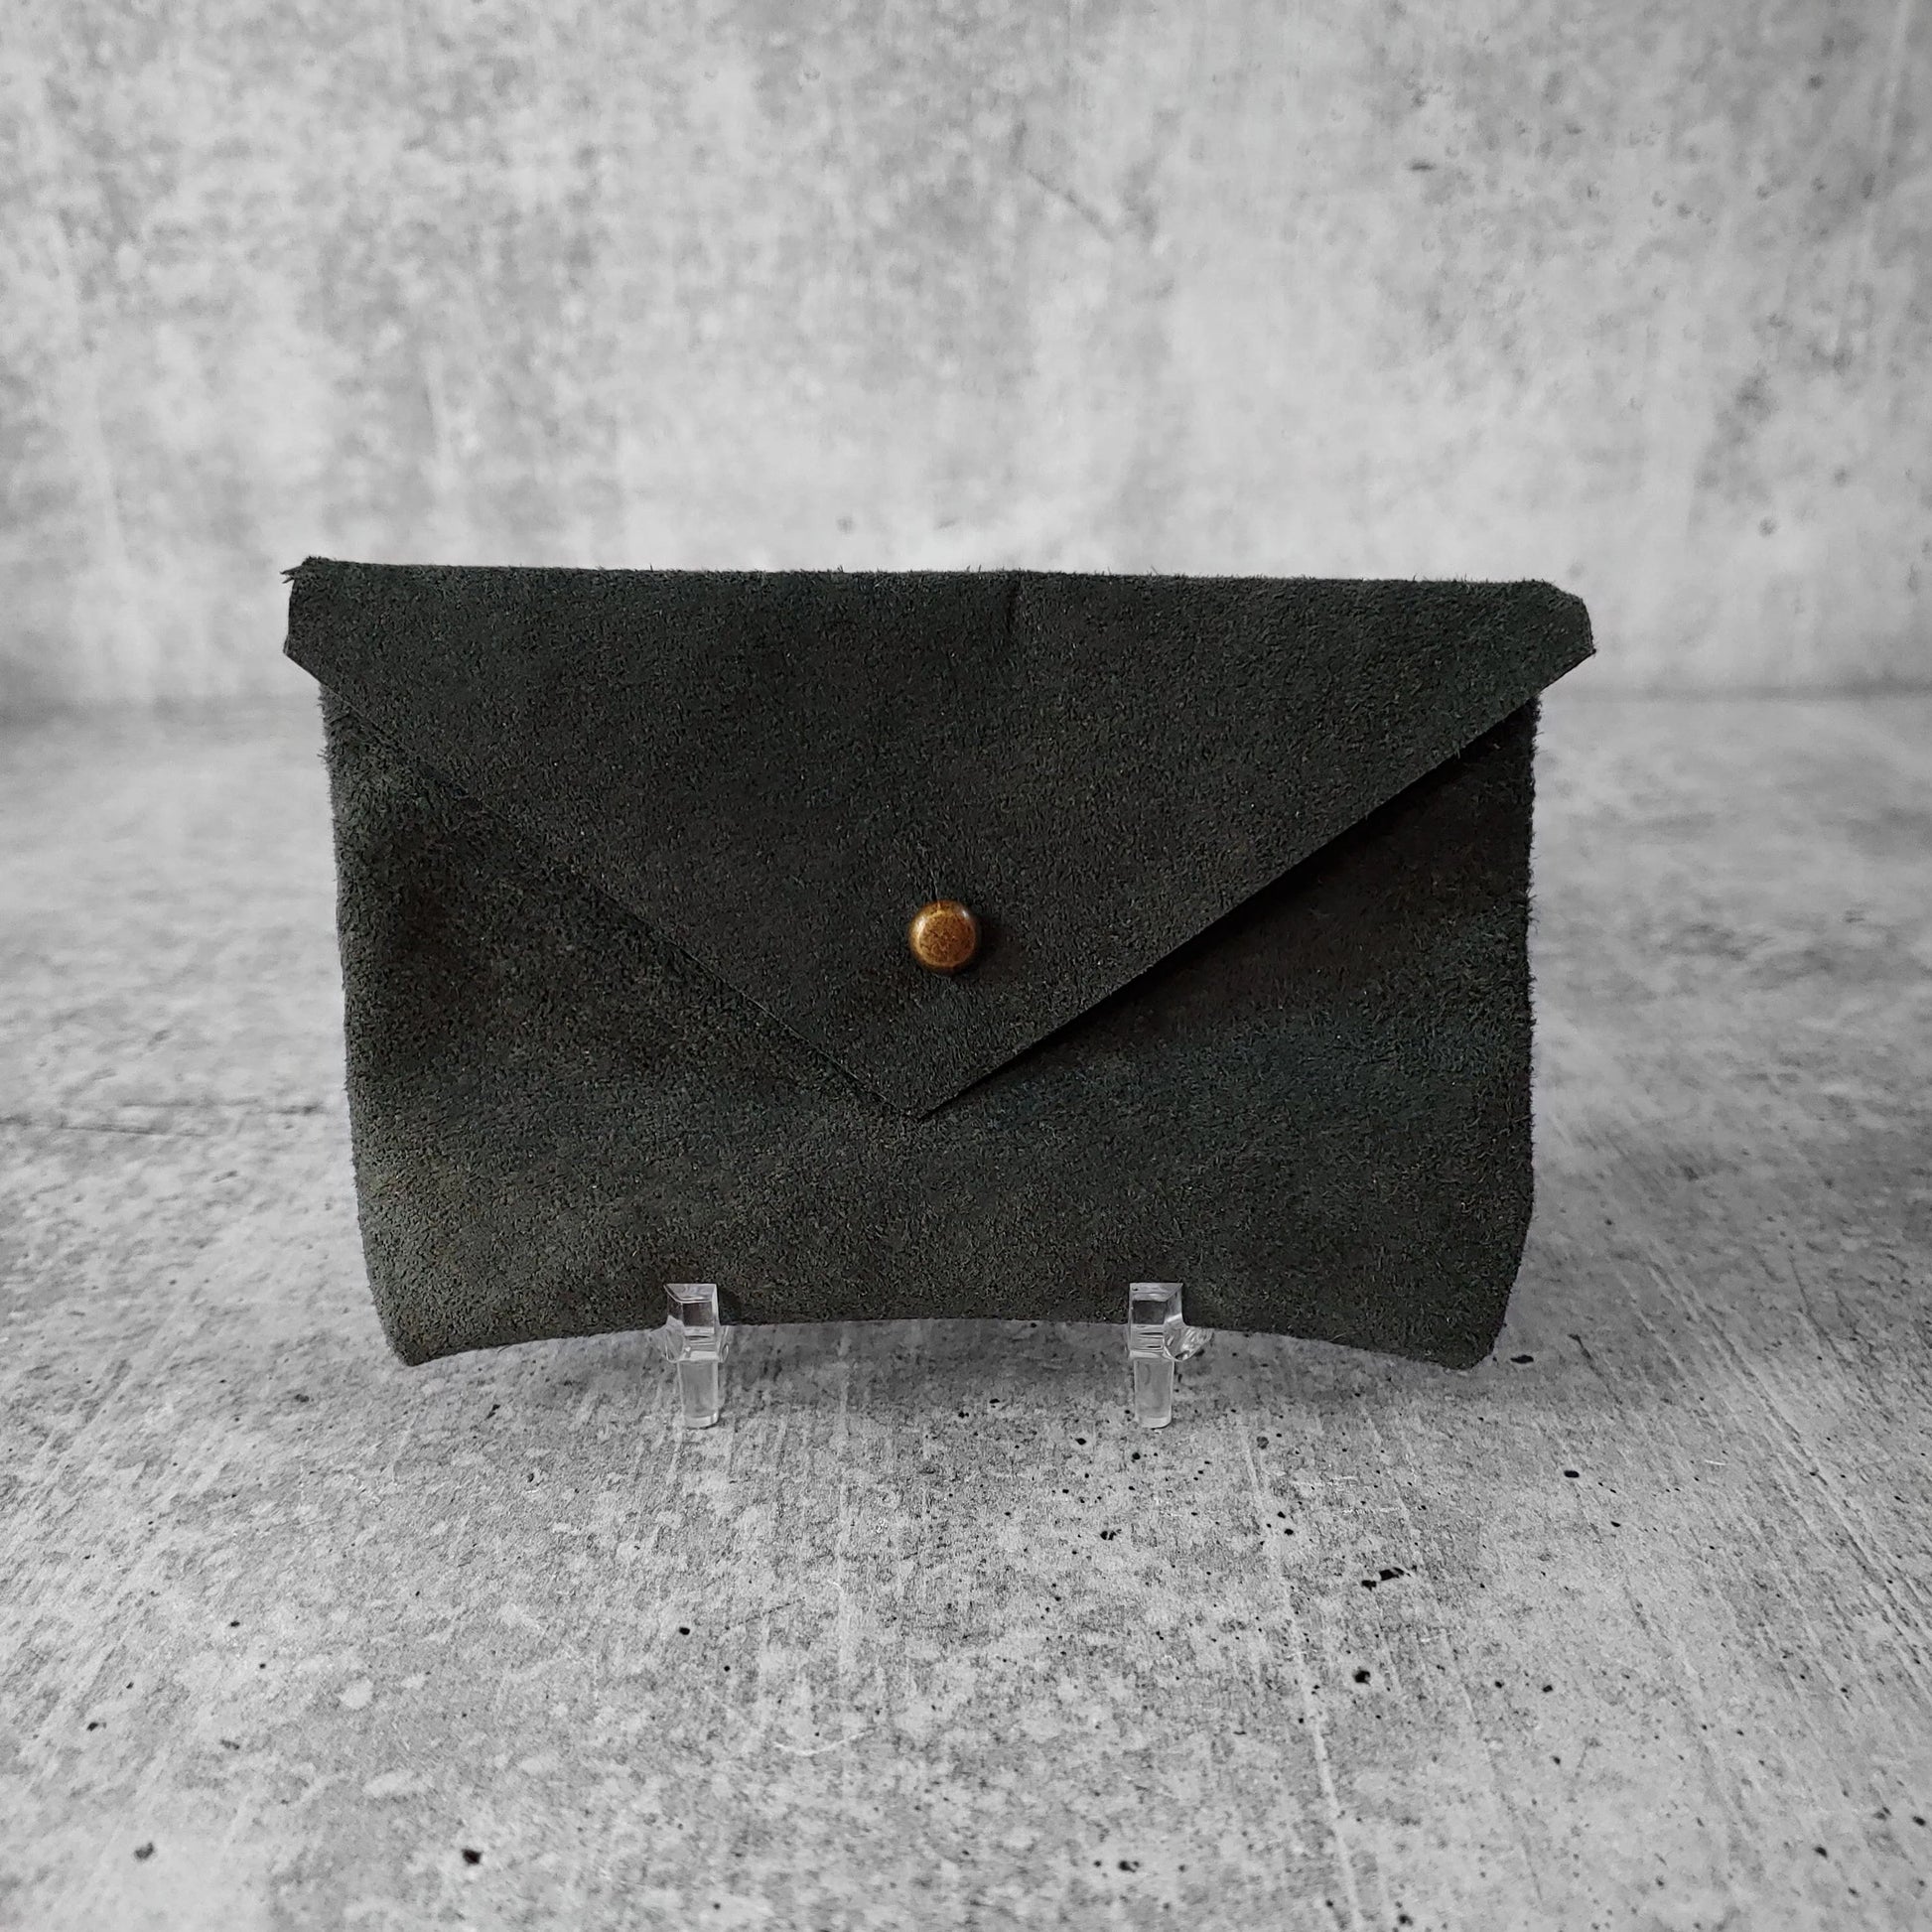 Front facing view of "soft leather card holder" in rosemary against a concrete background.